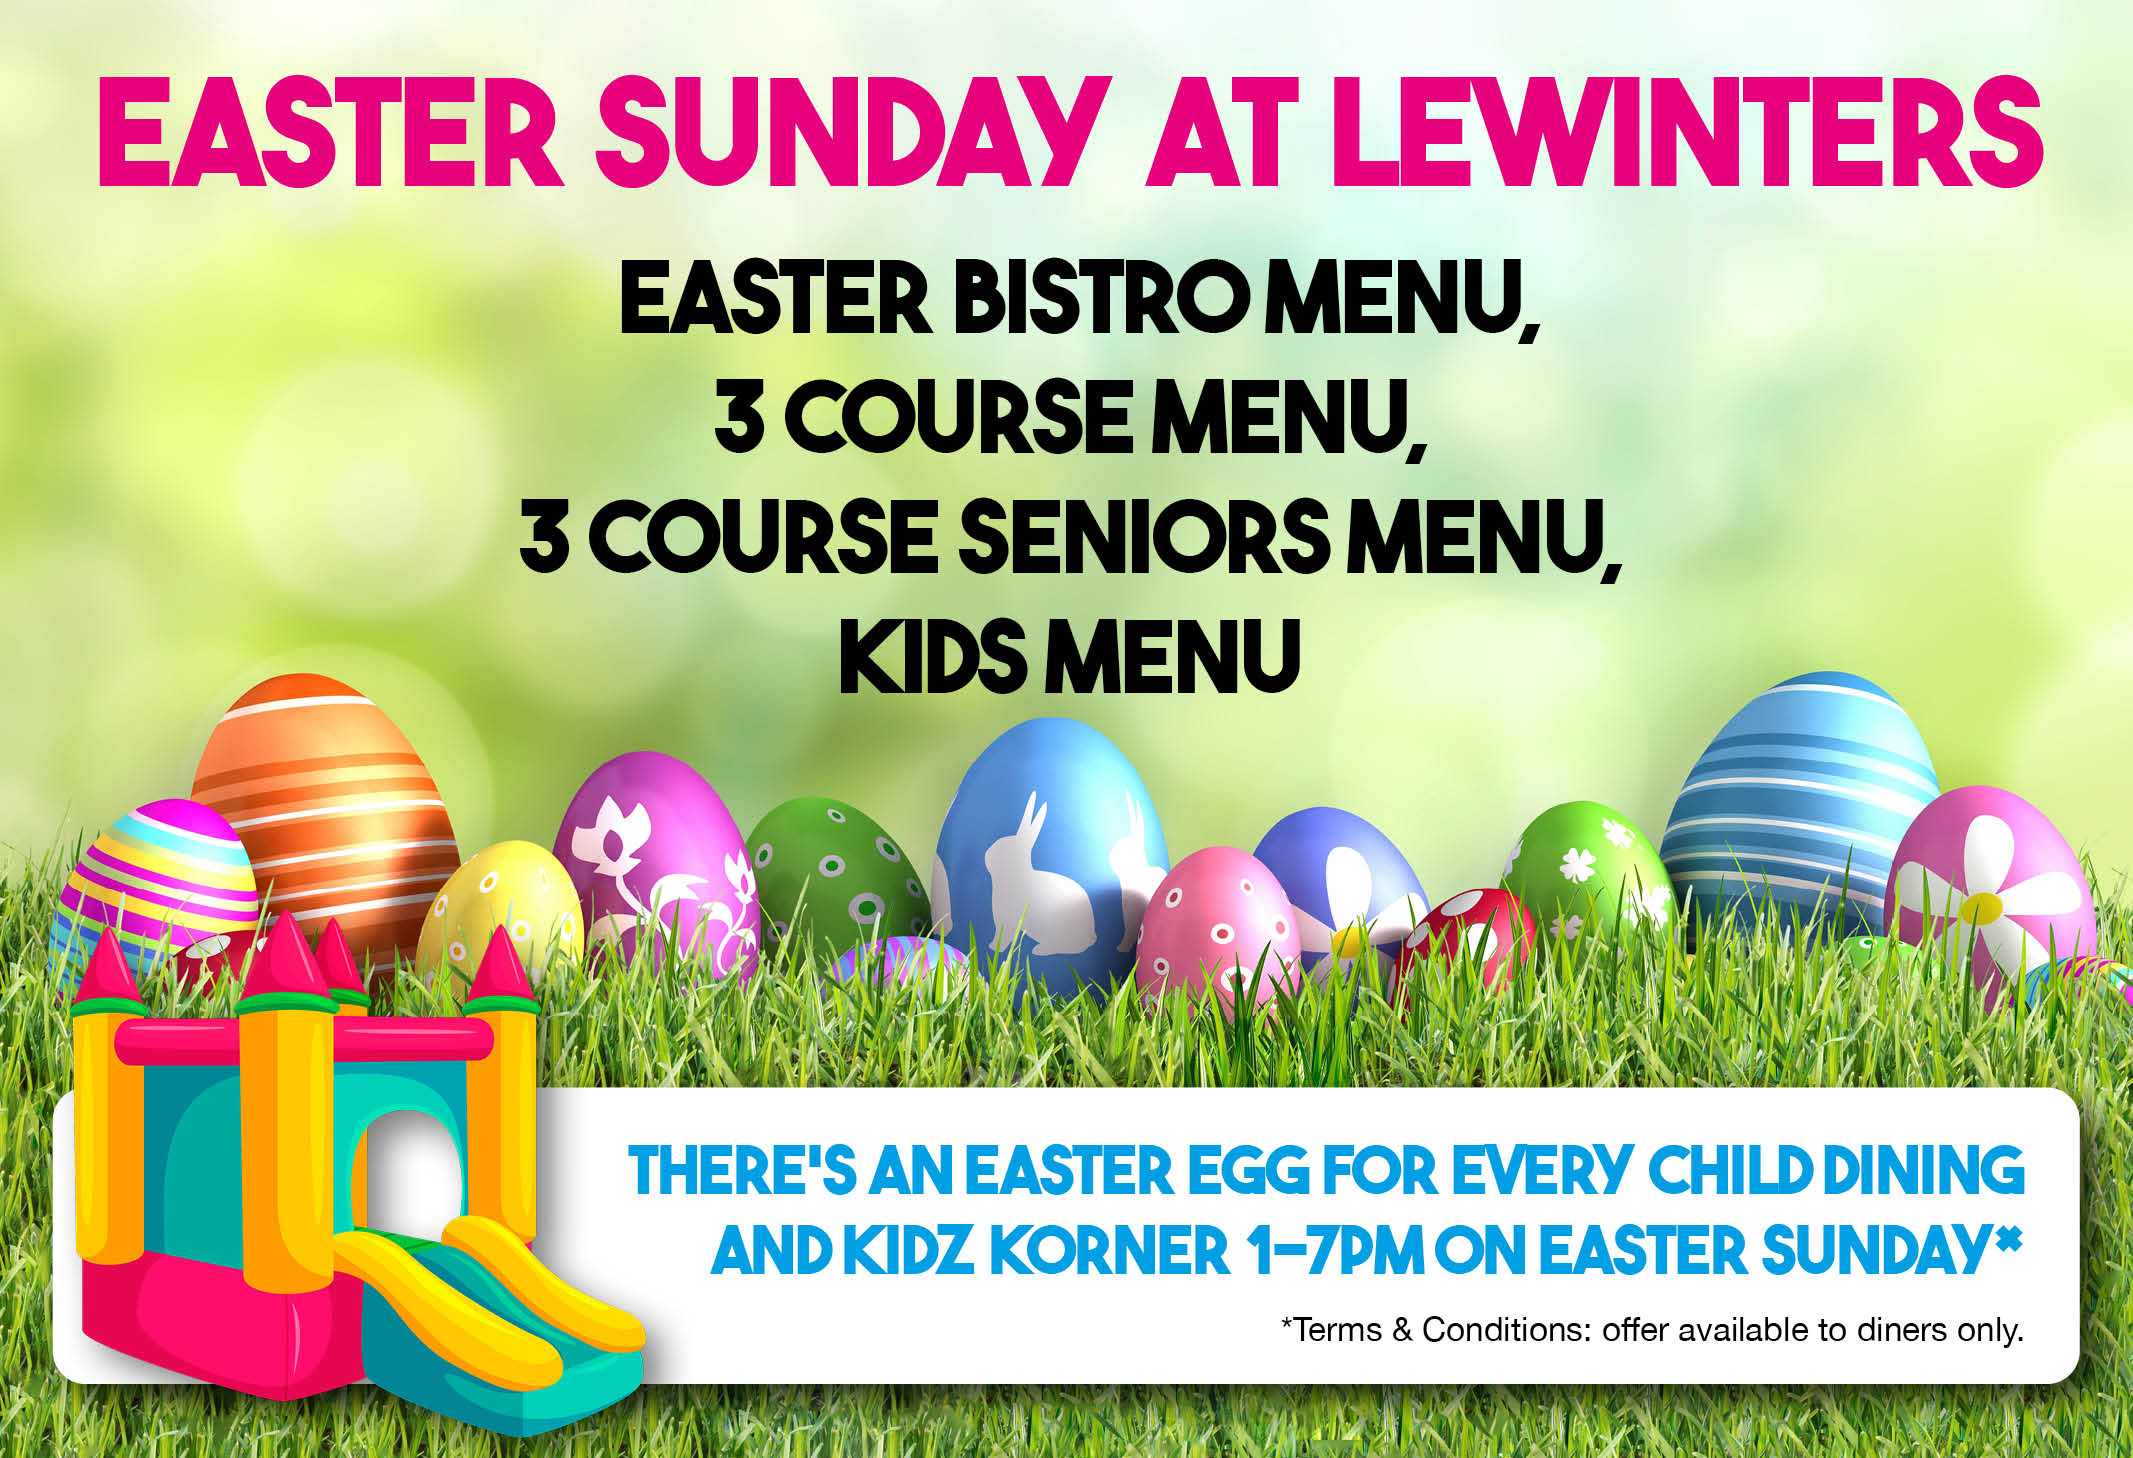 Easter Sunday at Lewinters